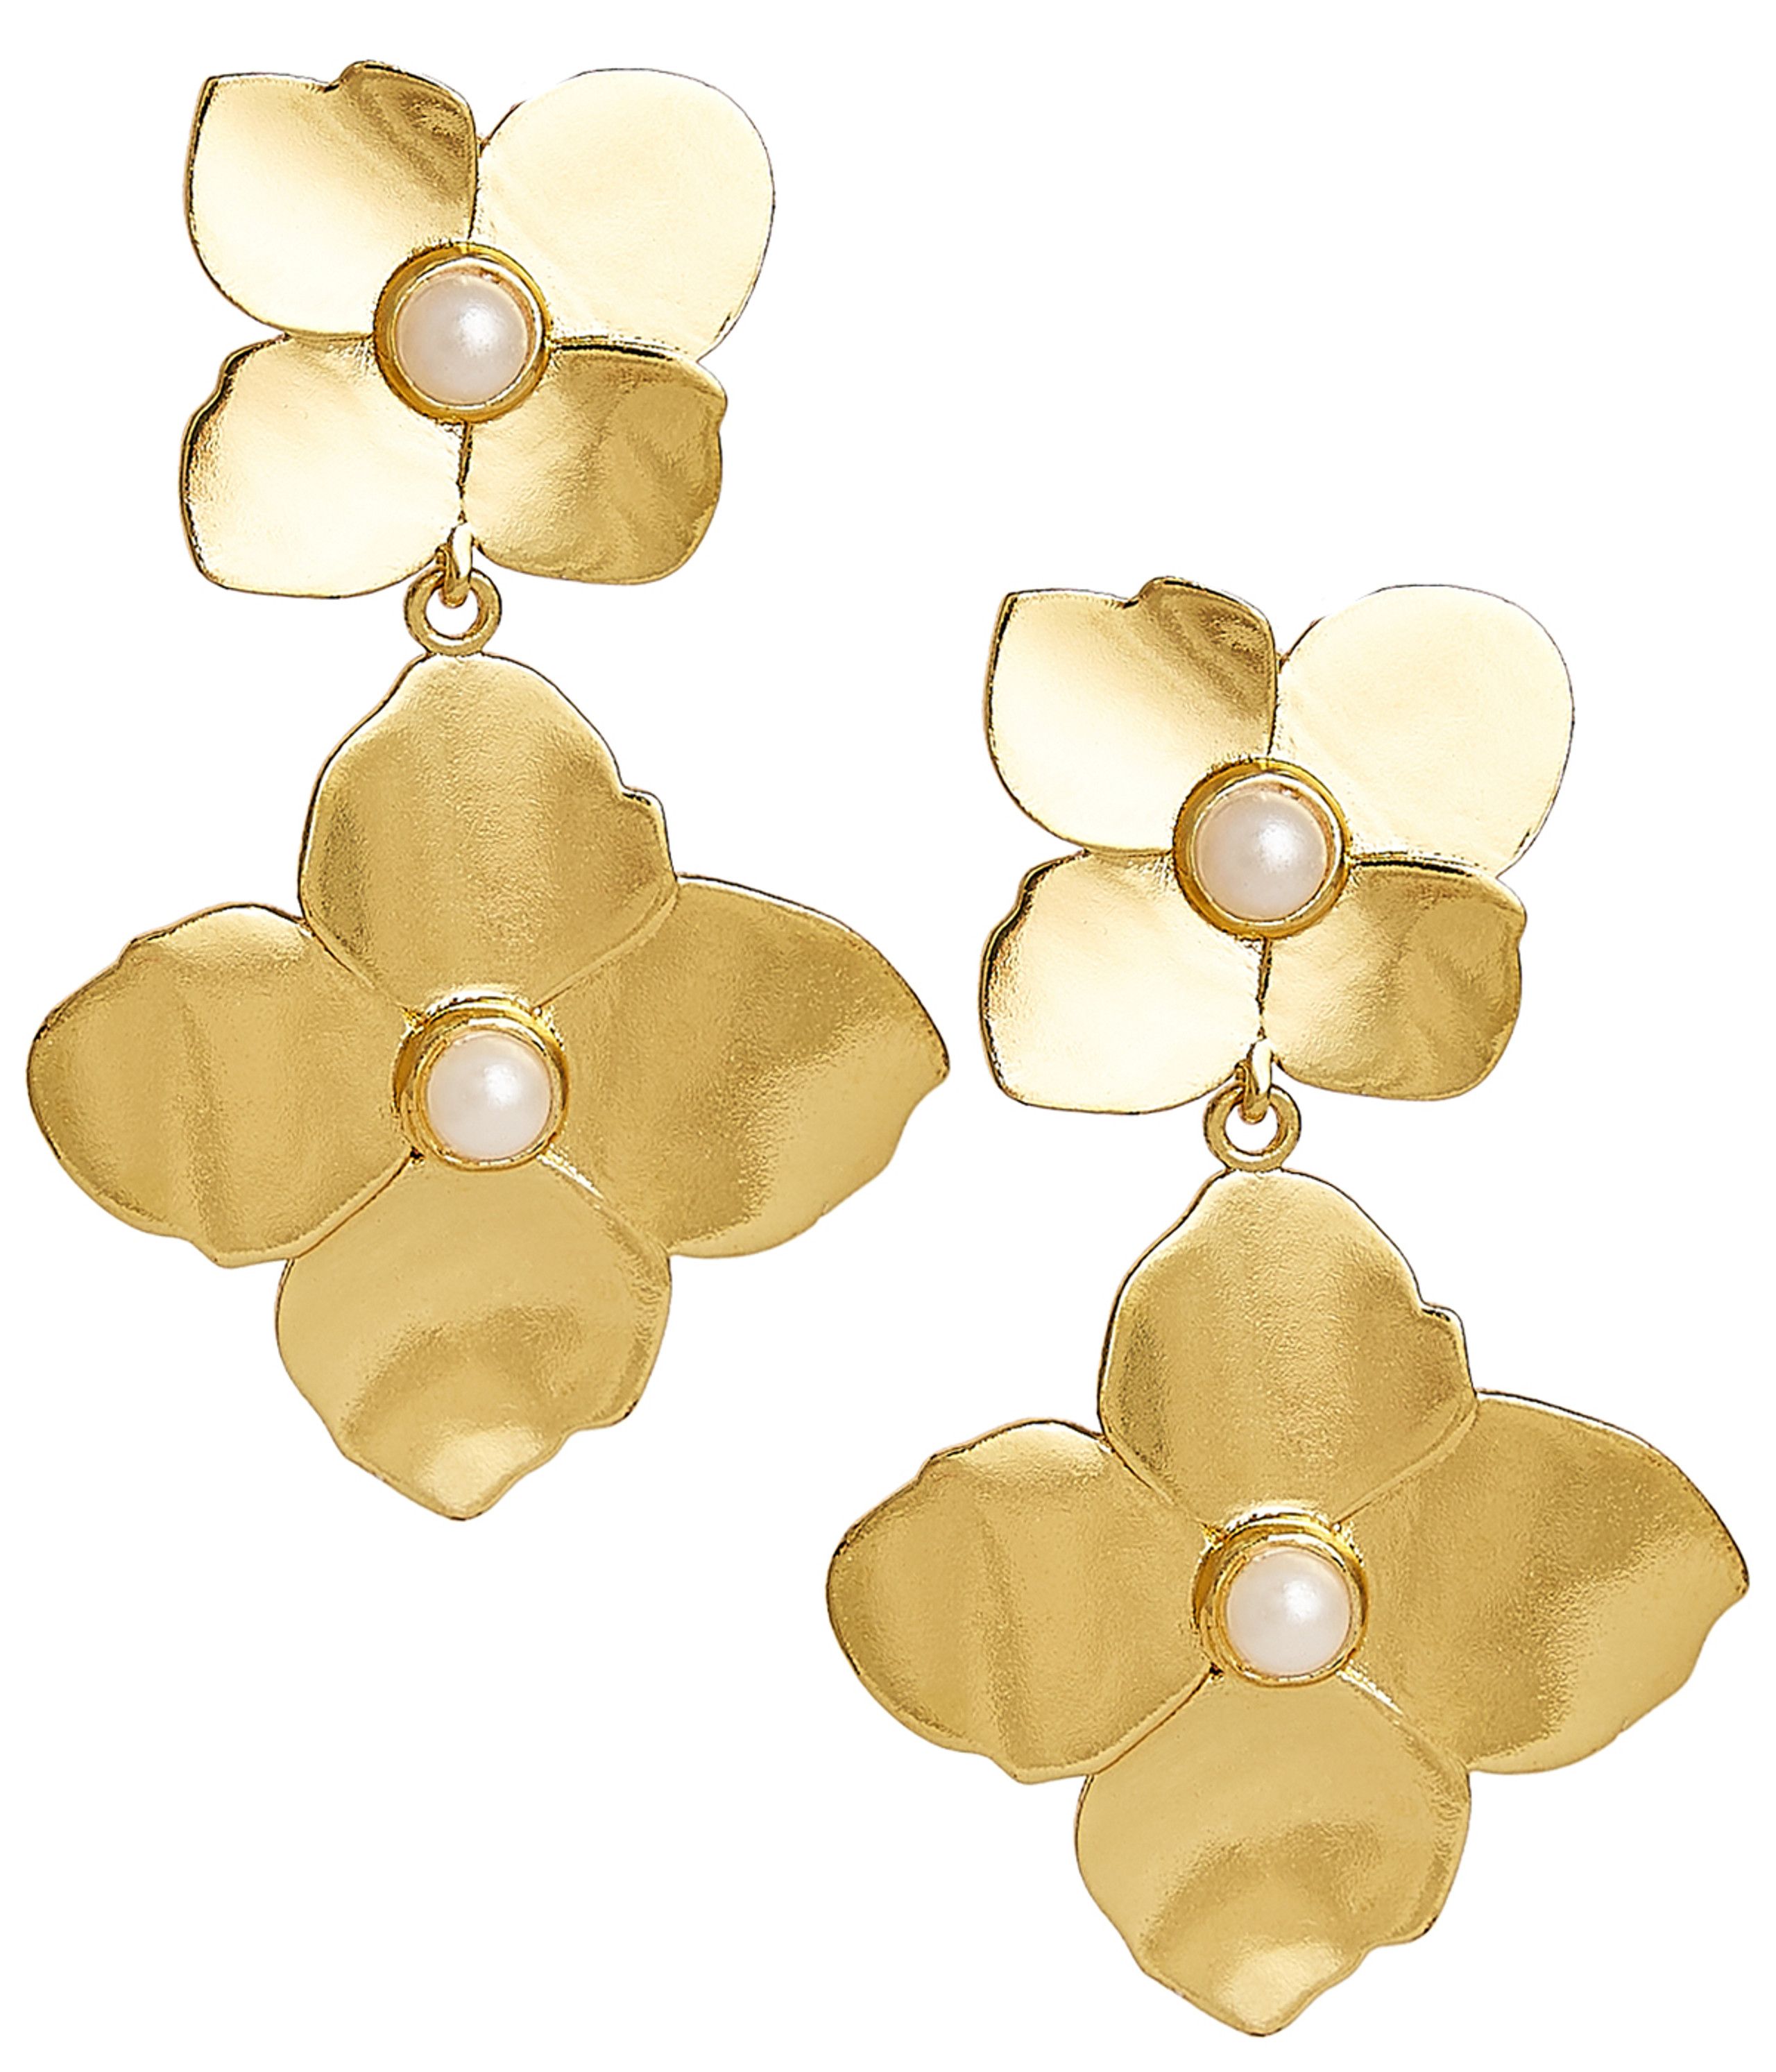 James Statement - Earrings - Belle of  the Ball | Lisi Lerch Inc